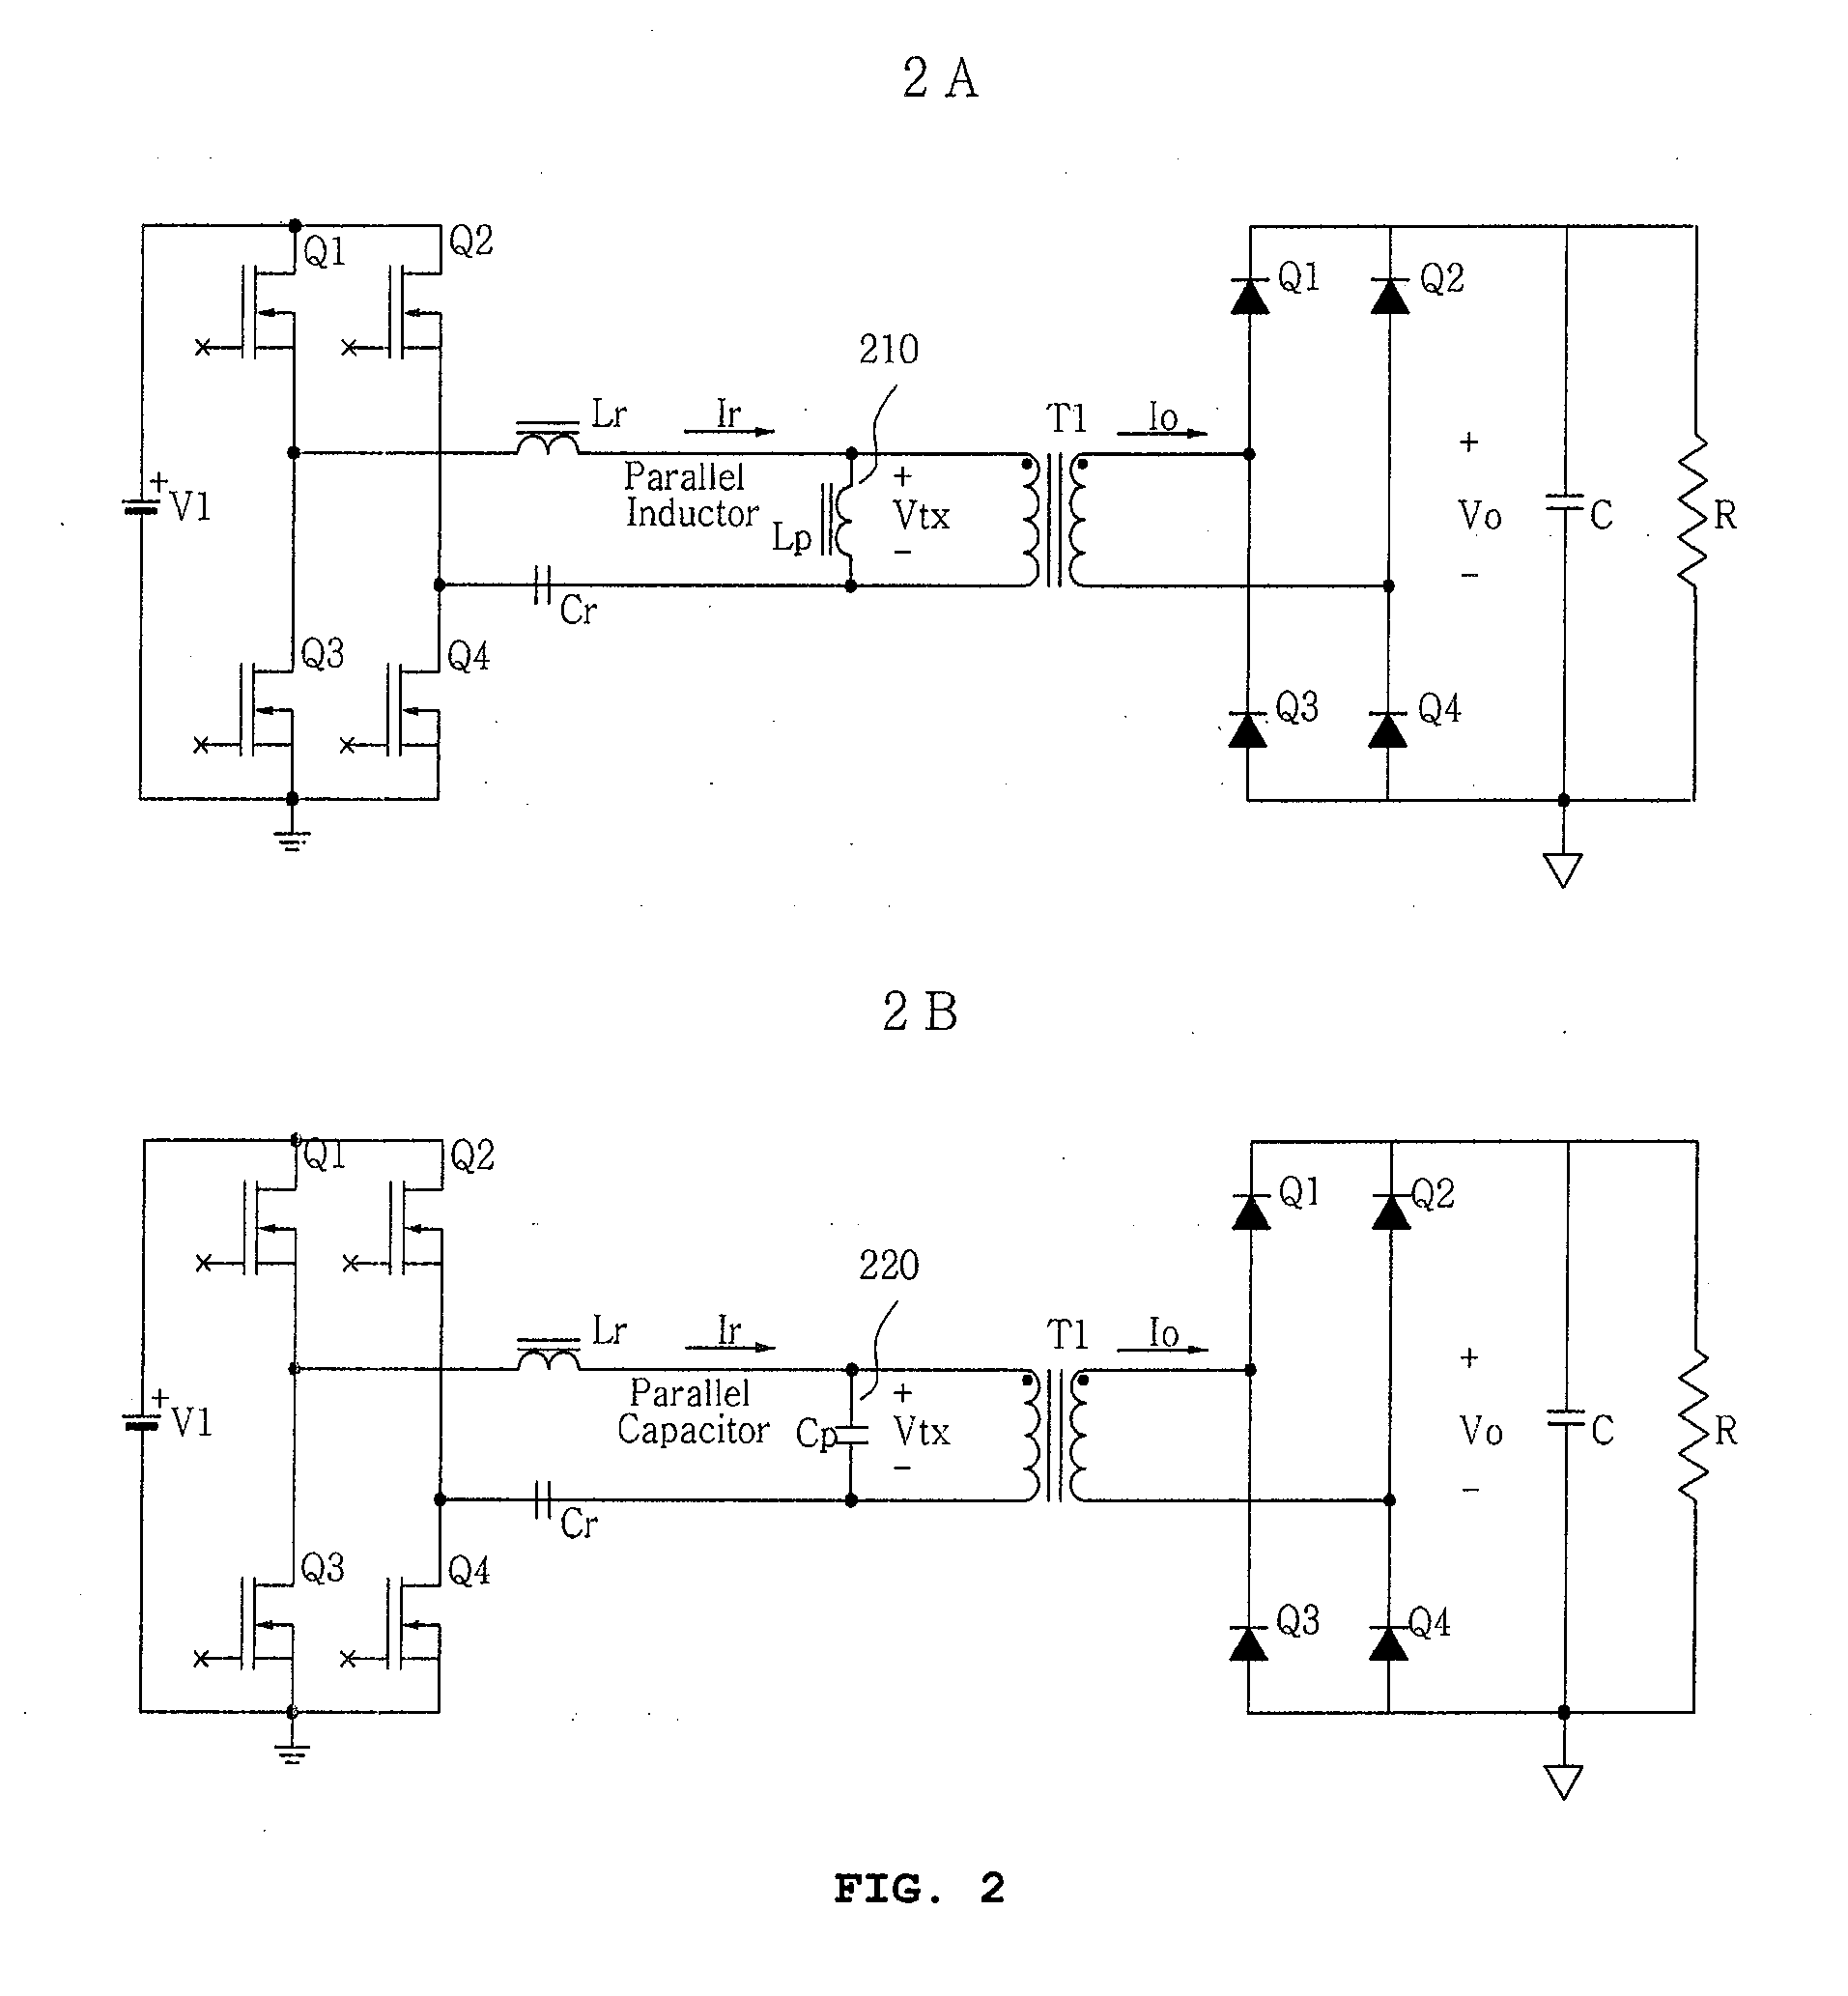 Synchronous Rectifier Type Series Resonant Converter for Operating in Intermittence Mode